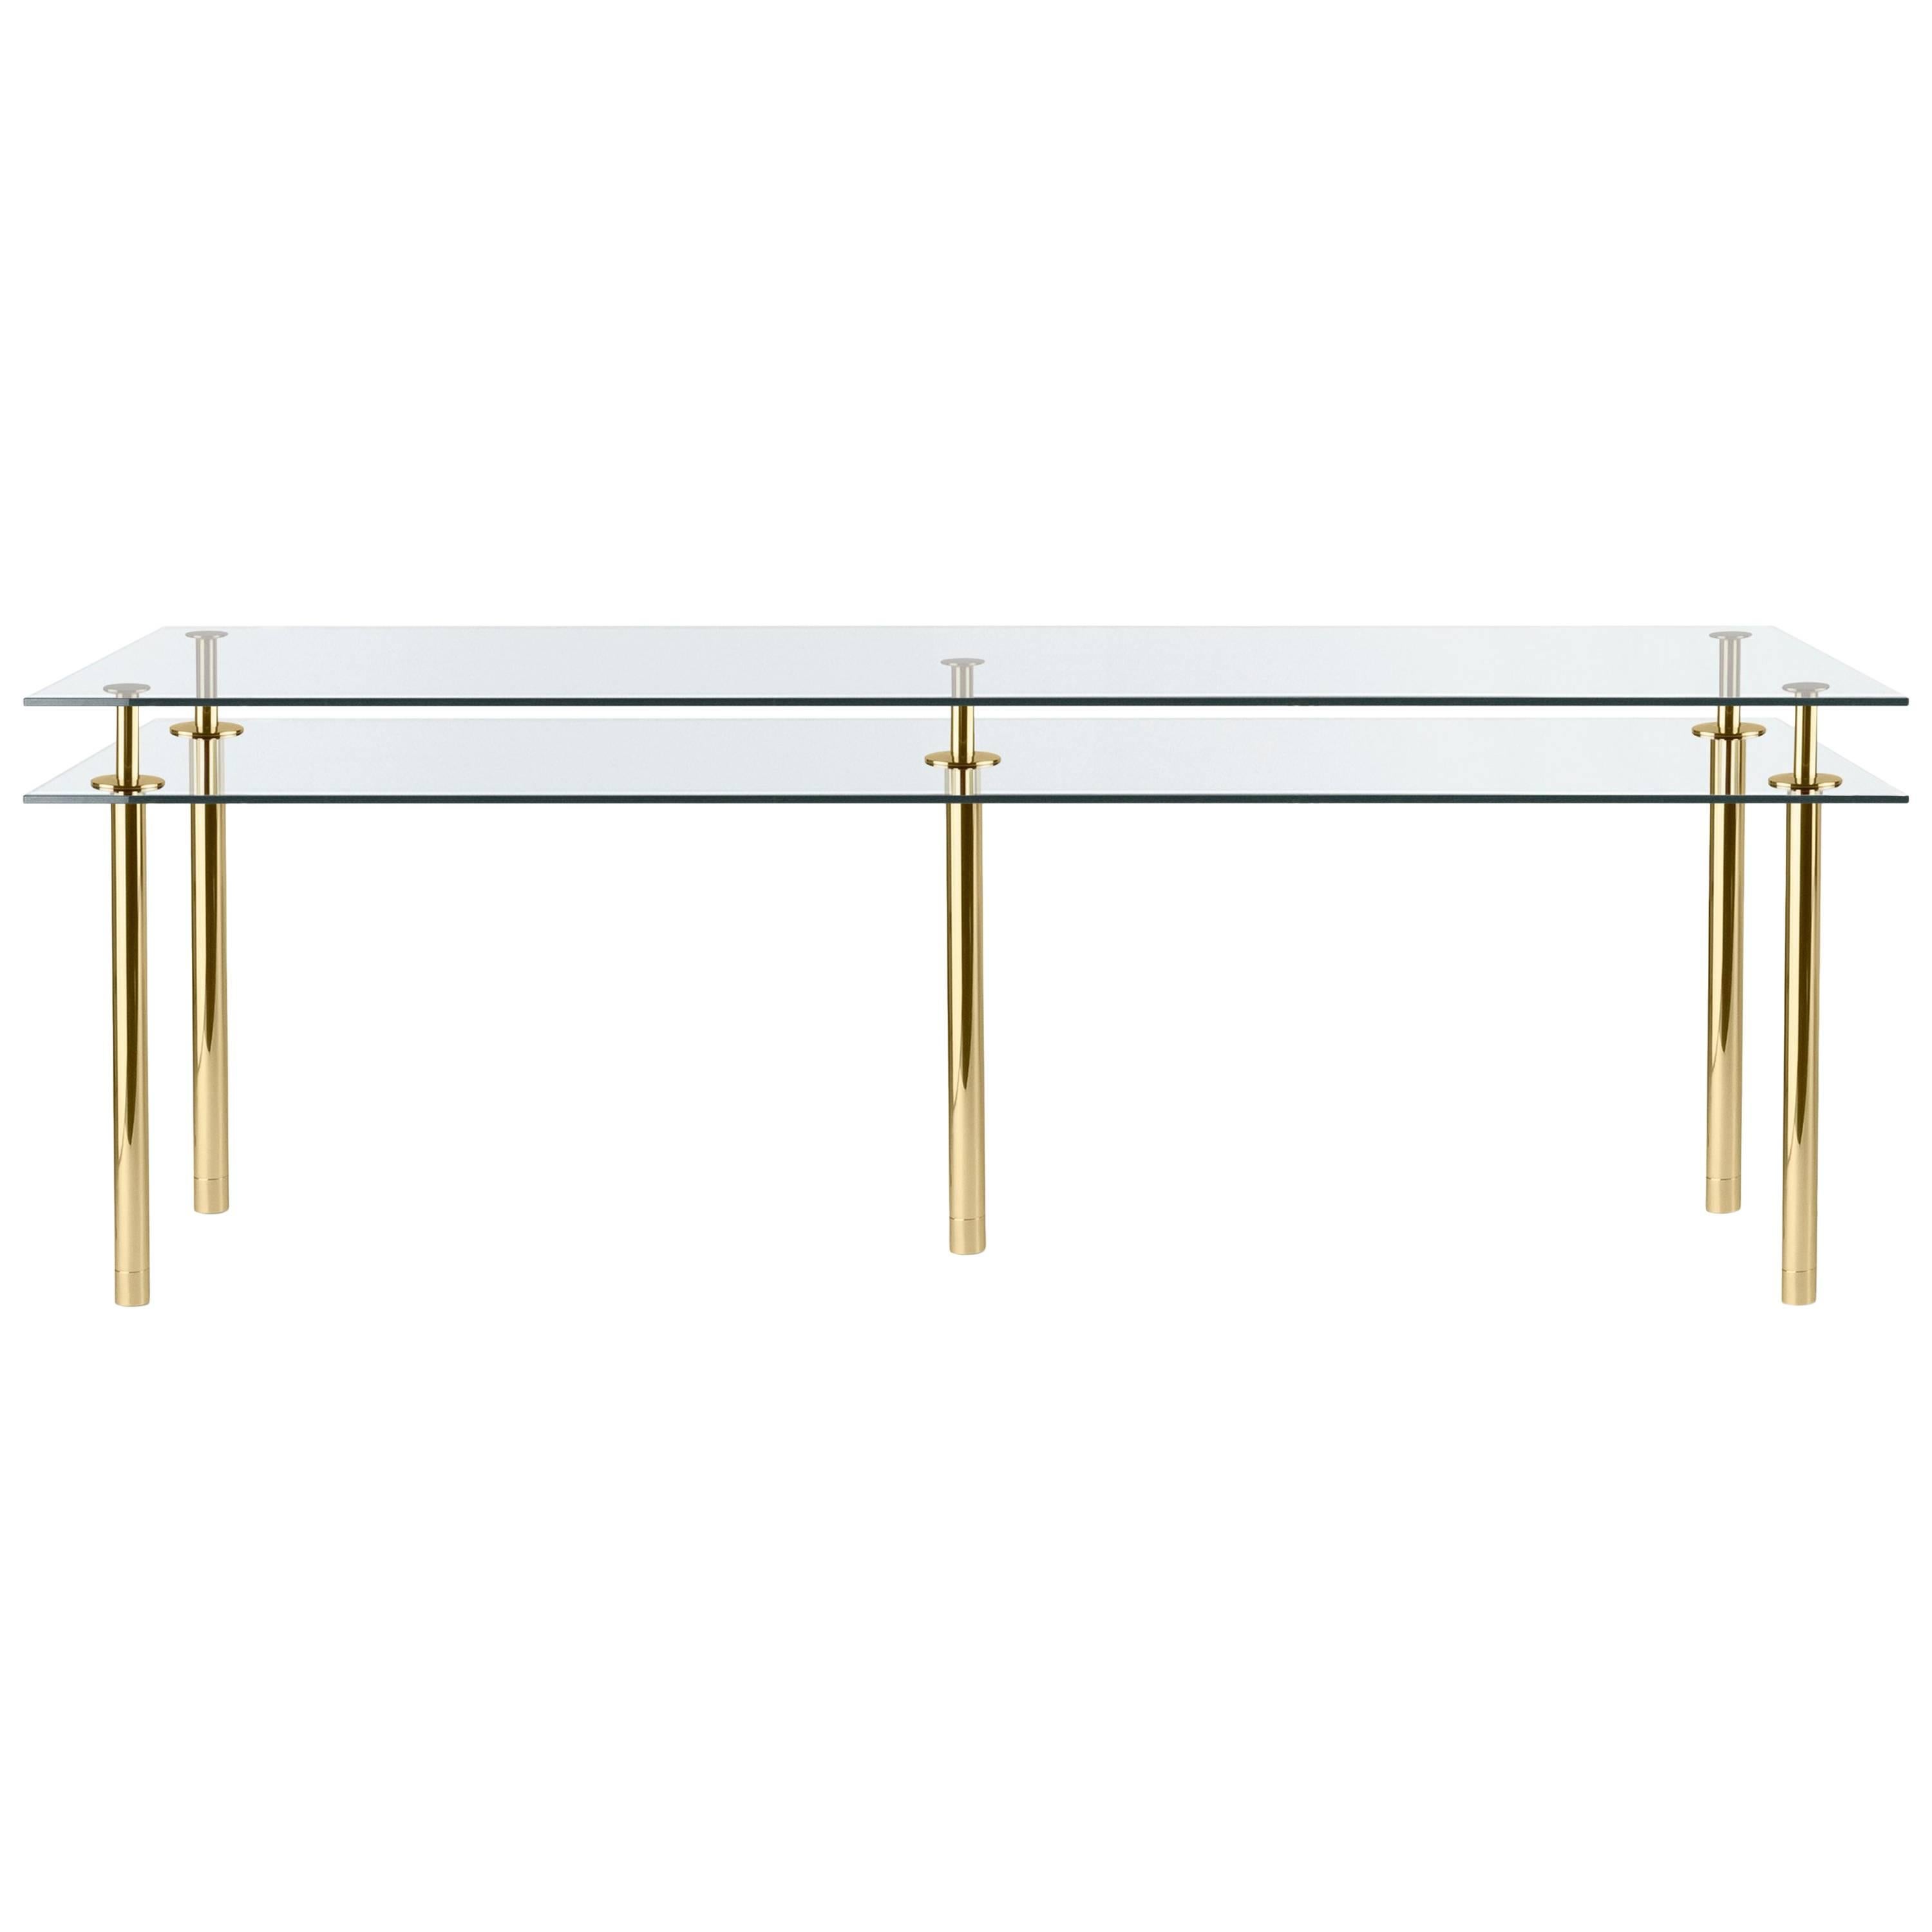 Ghidini 1961 Legs Large Rectangular Table in Crystal and Polished Brass For Sale